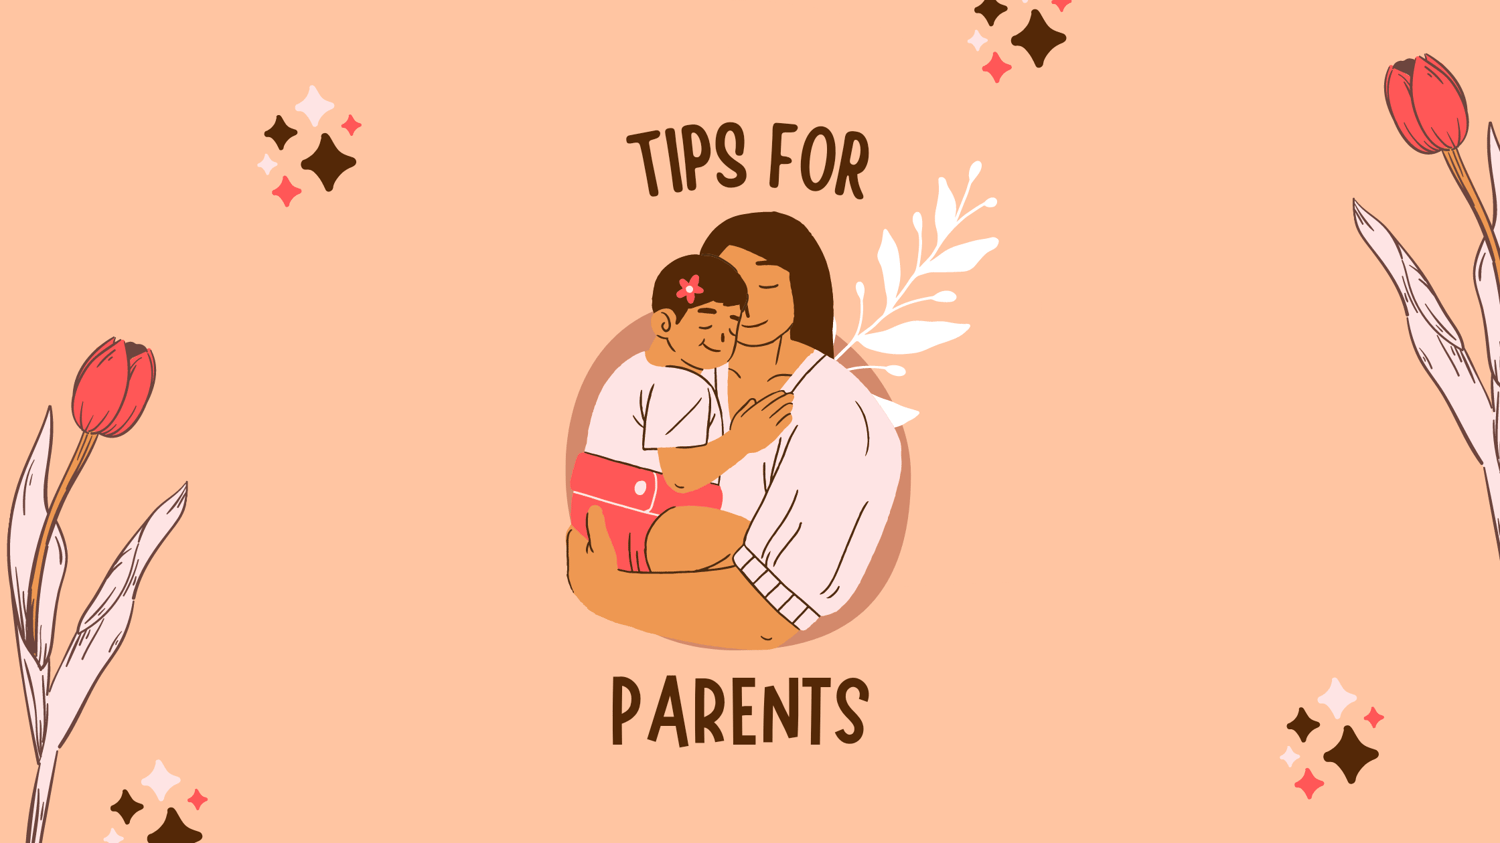 Parenting tips: how to safely raise children